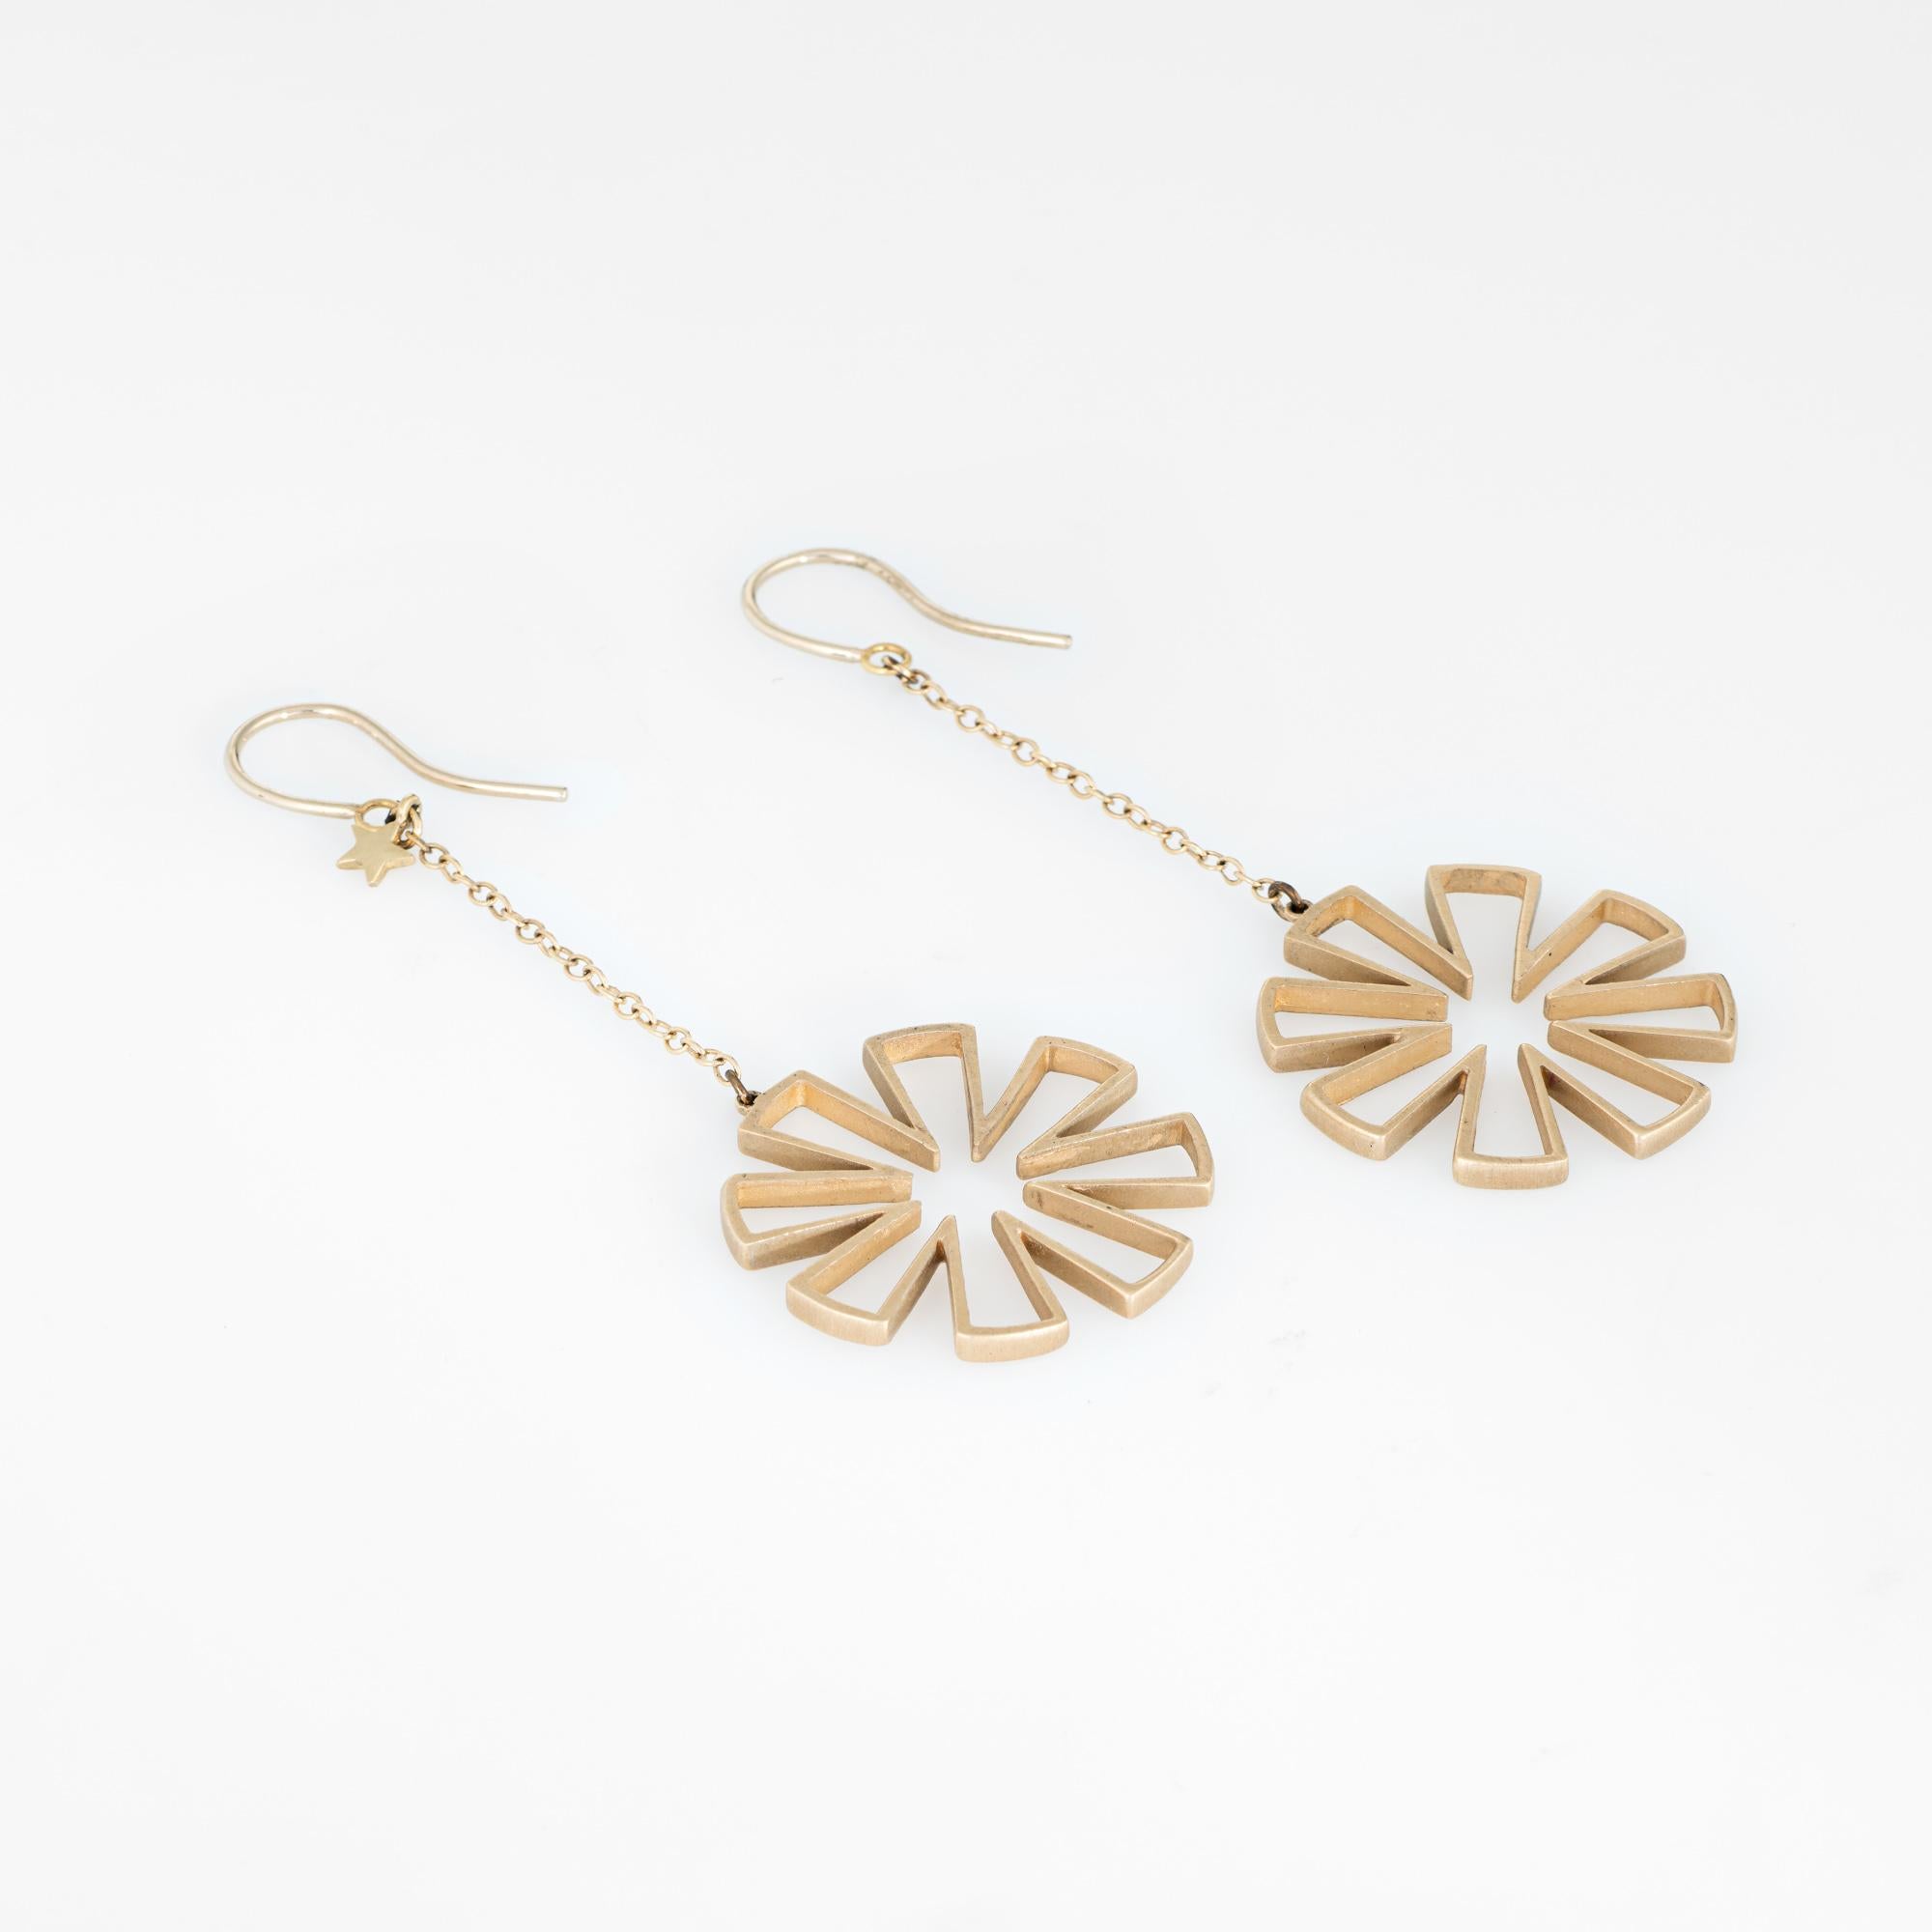 Elegant pair of estate snowflake drop earrings crafted in 14k yellow gold. 

The long 2 1/2 inch earrings feature a round star or snowflake style design. A small star is attached to one of the earrings (upper). The stylish earrings are ideal for day